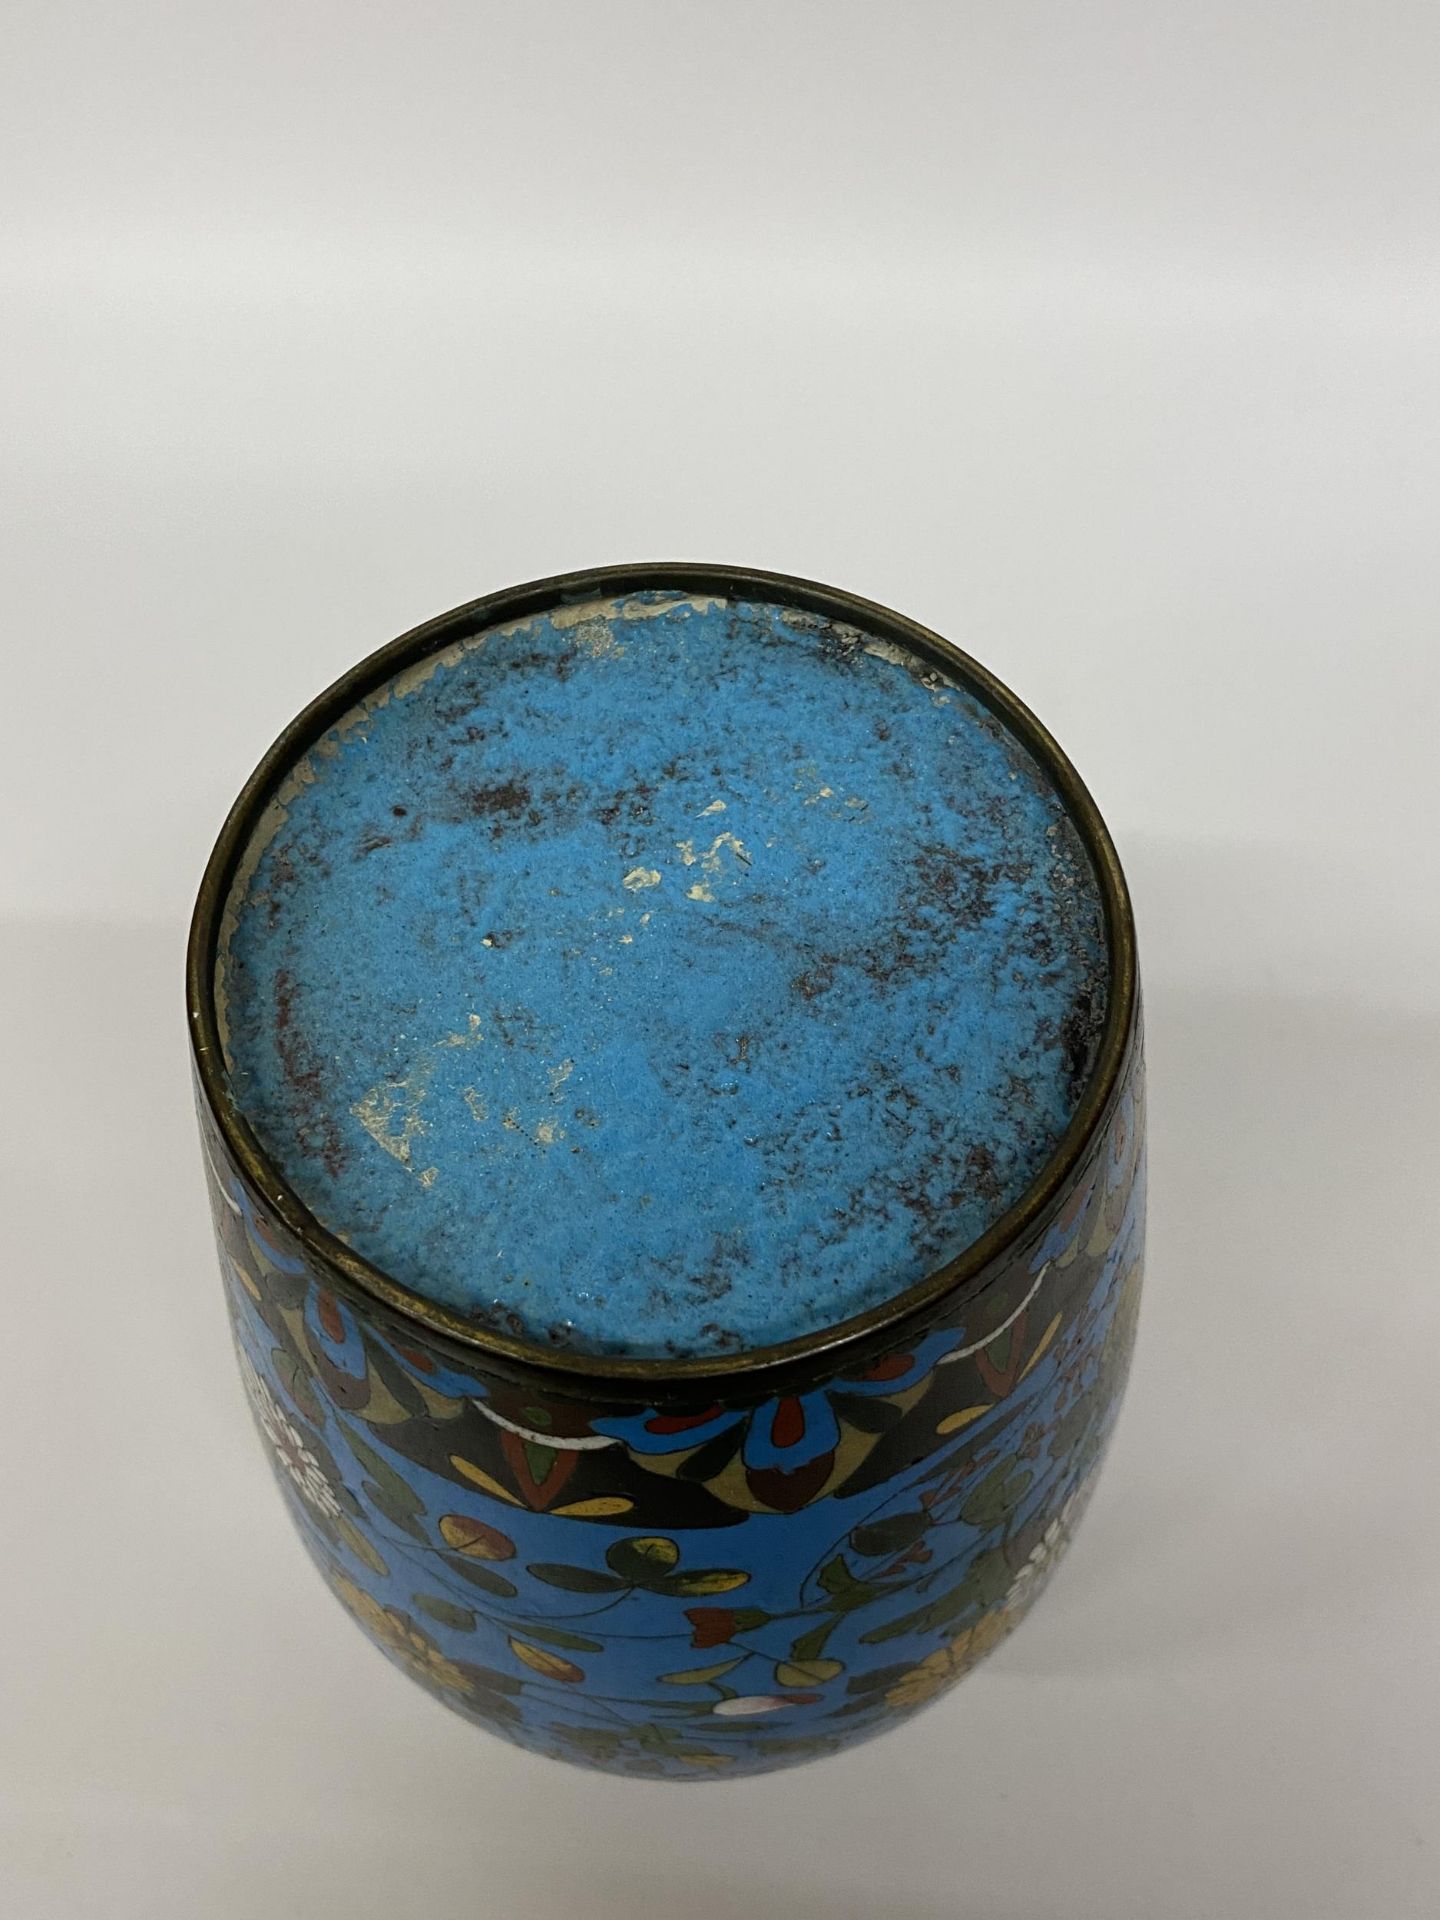 AN EARLY 20TH CENTURY CHINESE CLOISONNE VASE WITH BIRD AND FLORAL DESIGN, HEIGHT 25CM - Image 4 of 4